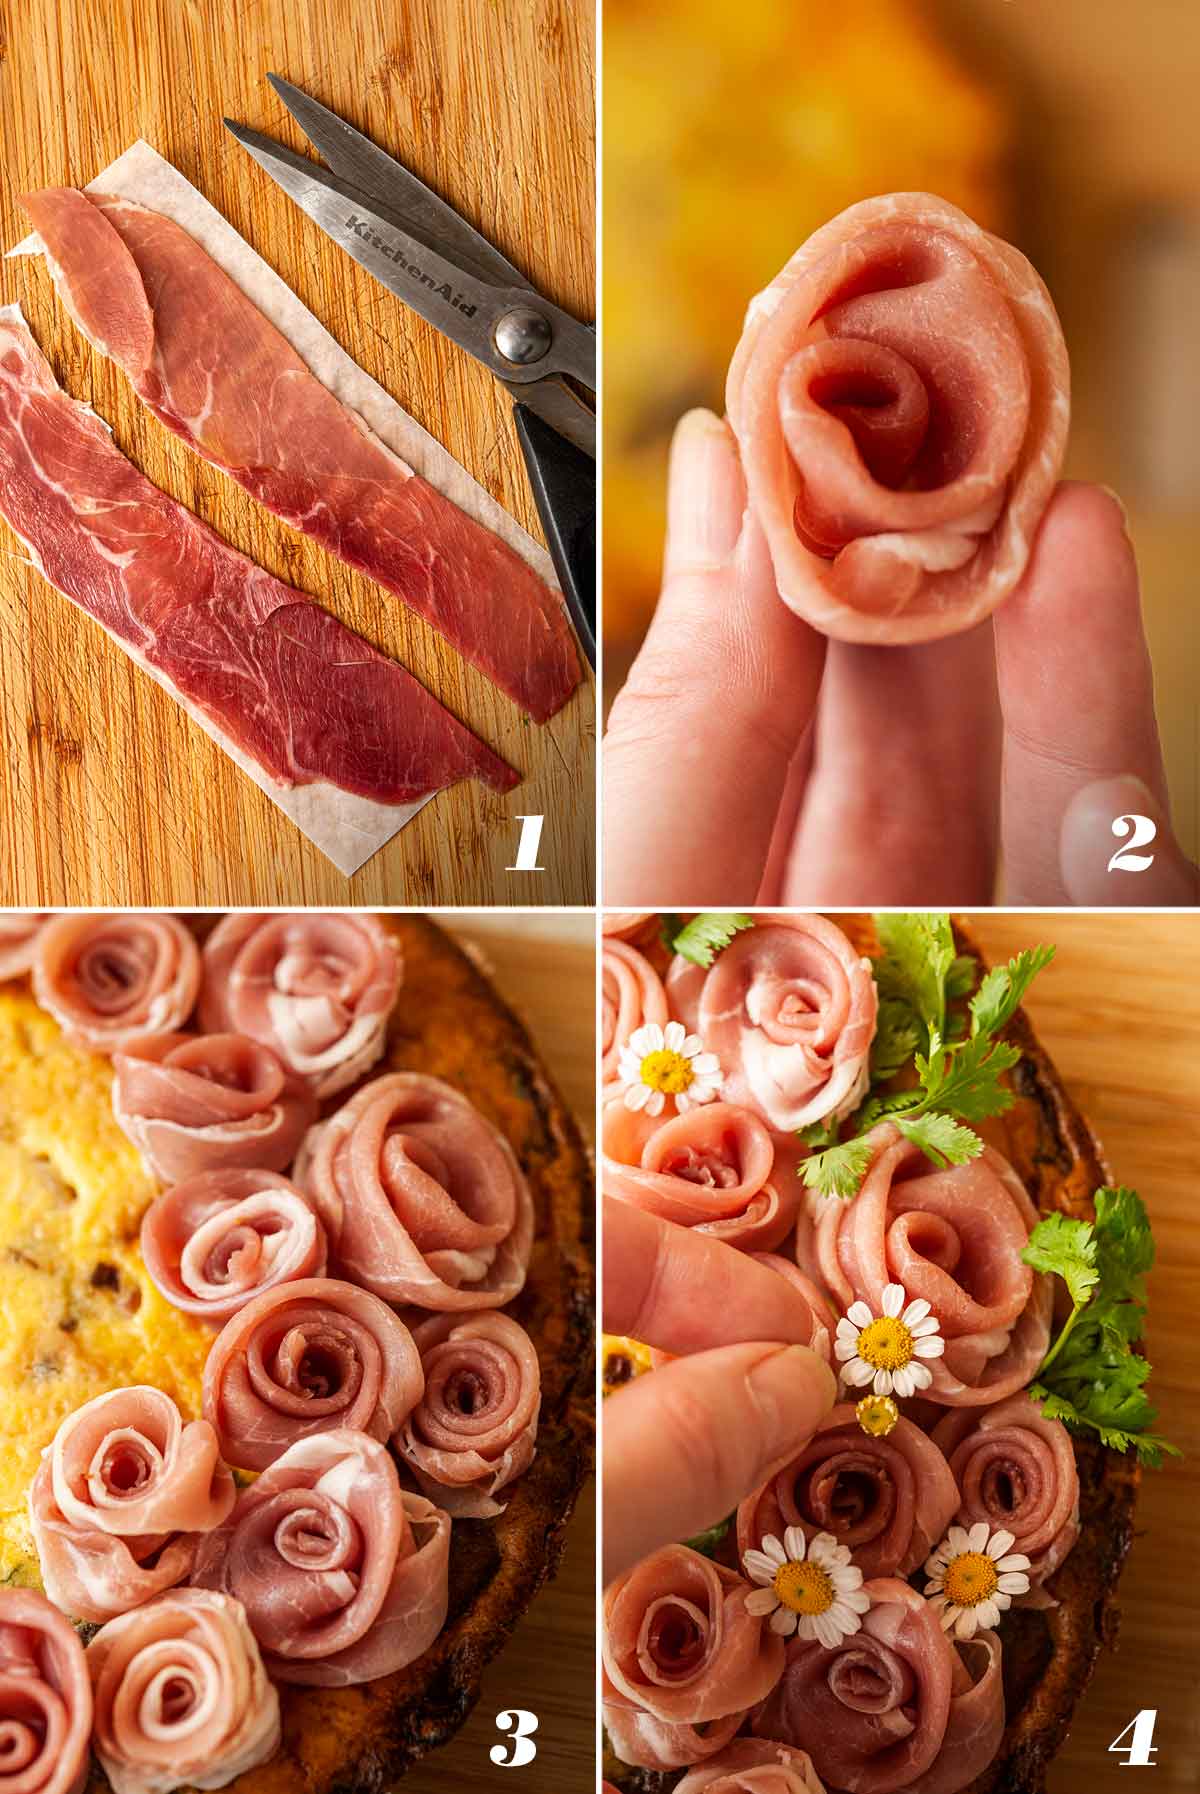 A collage of 4 numbered images showing how to make a prosciutto rose wreath.